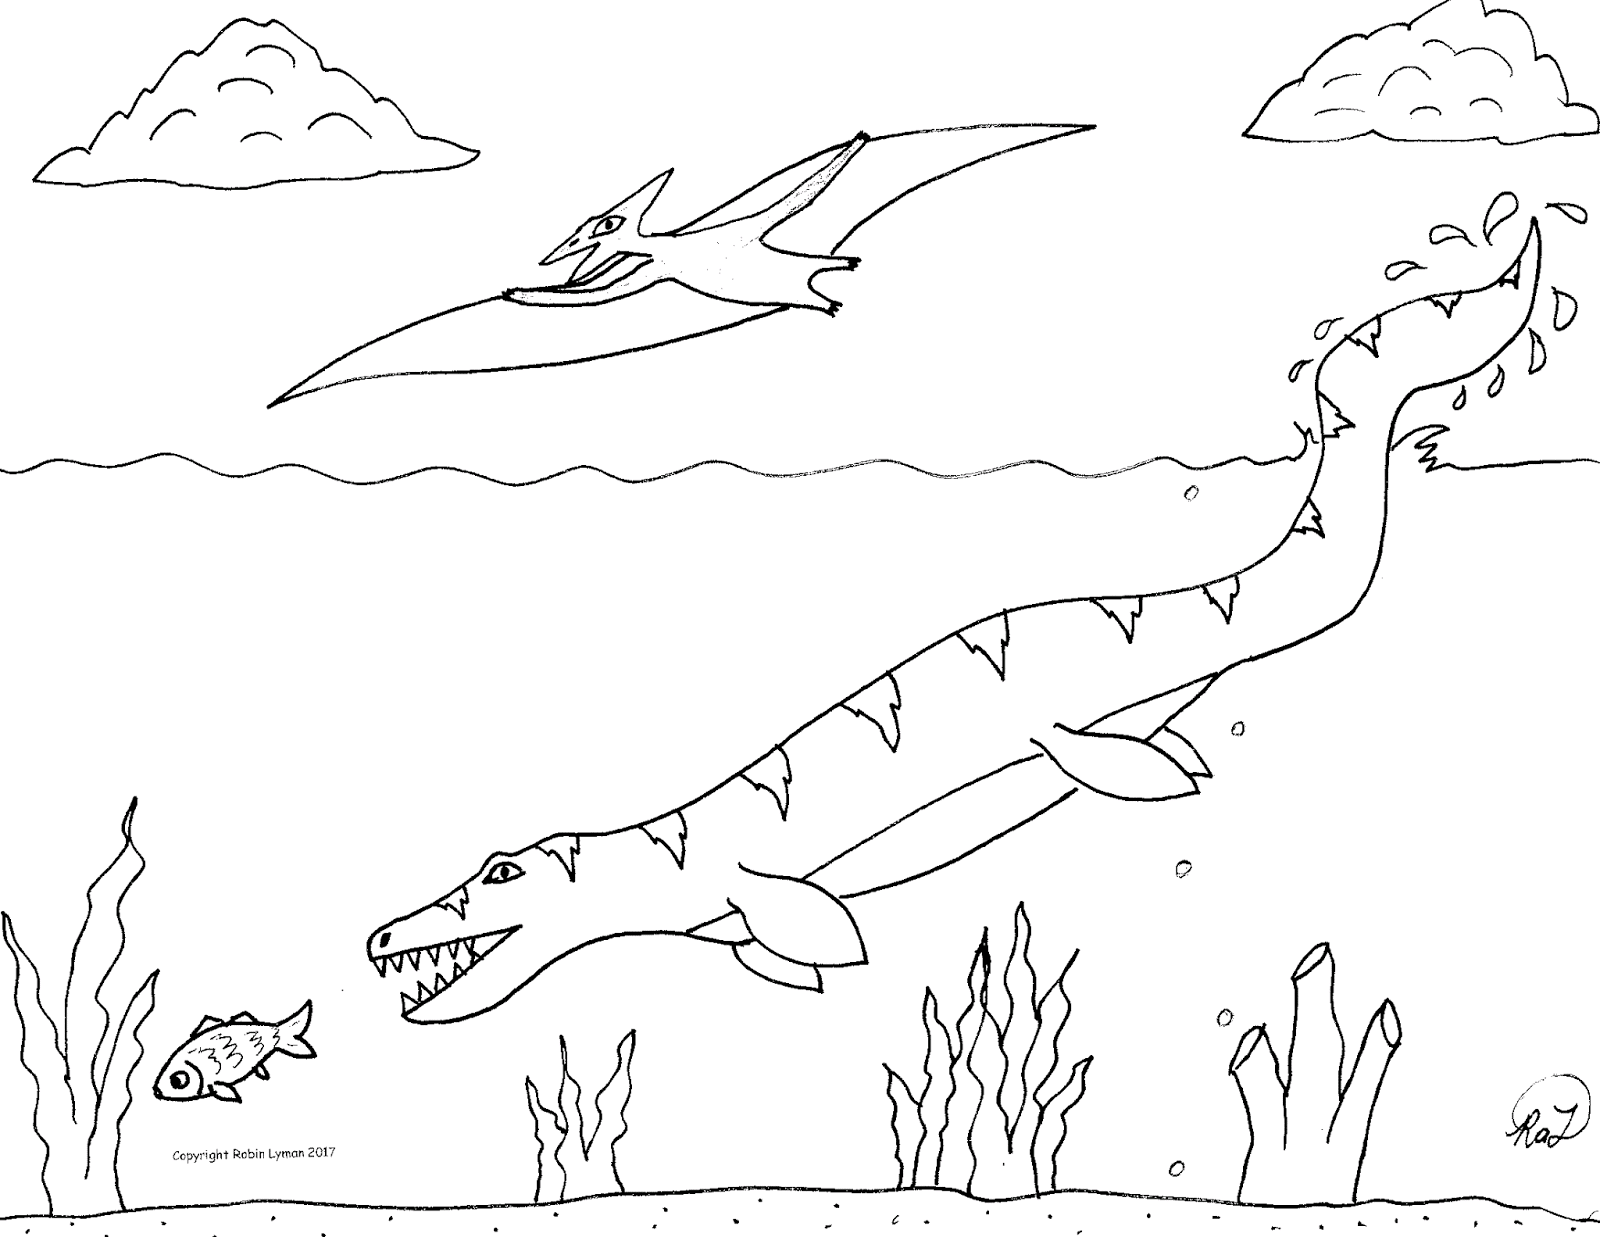 Download Robin's Great Coloring Pages: Tylosaurus the Mosasaur